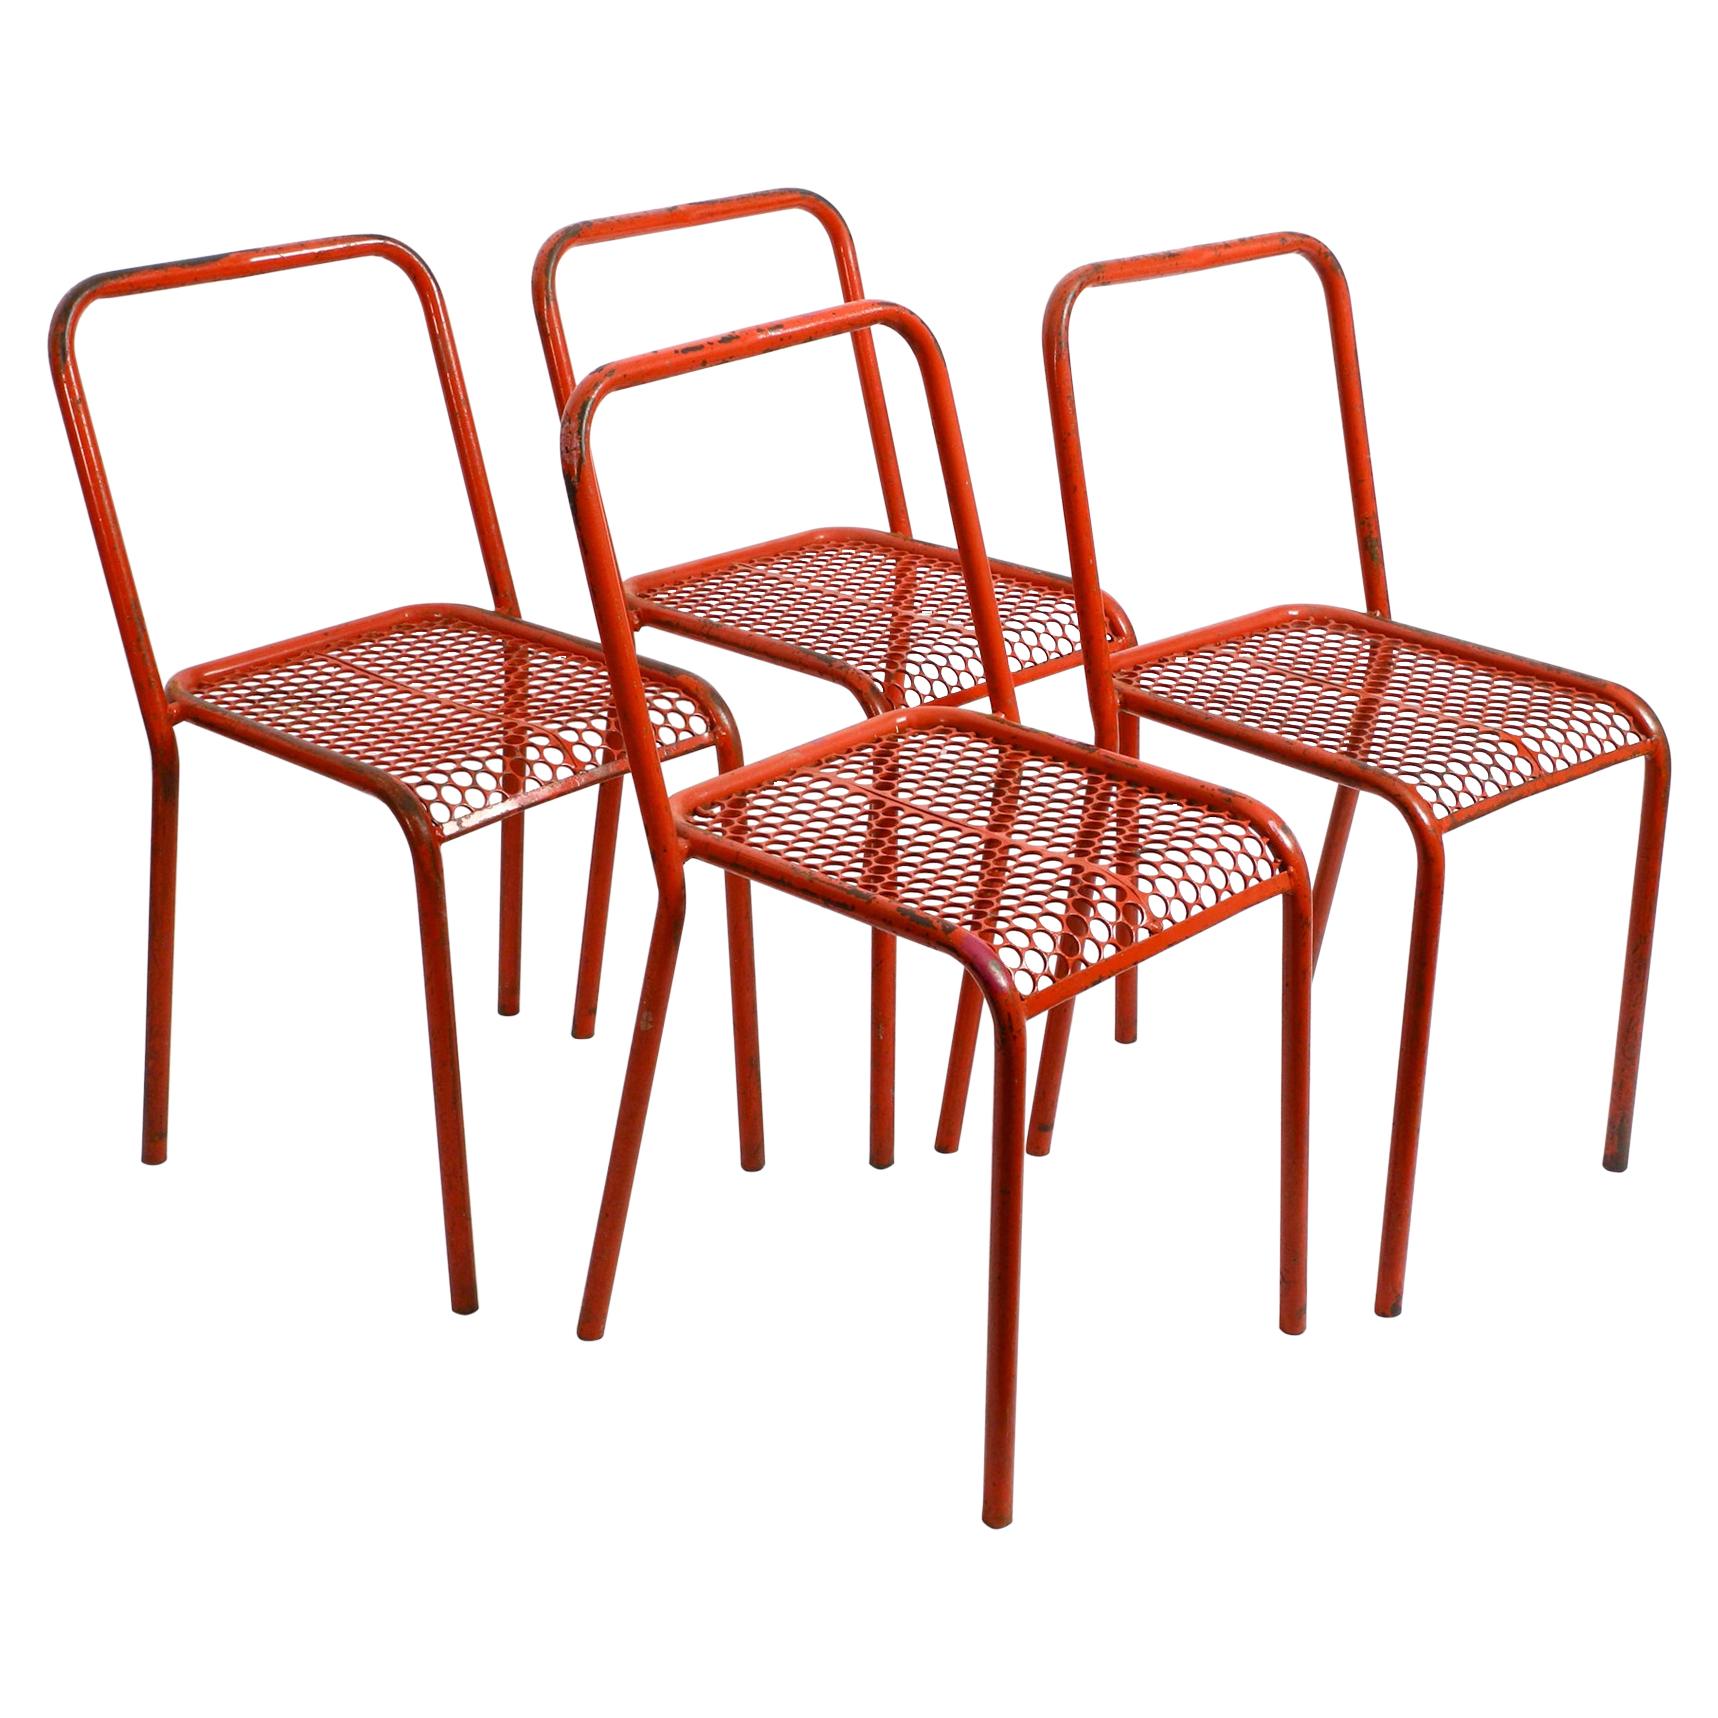 Four 1940s Industrial Metal Chairs by Réne Malaval in Their Original Red Color